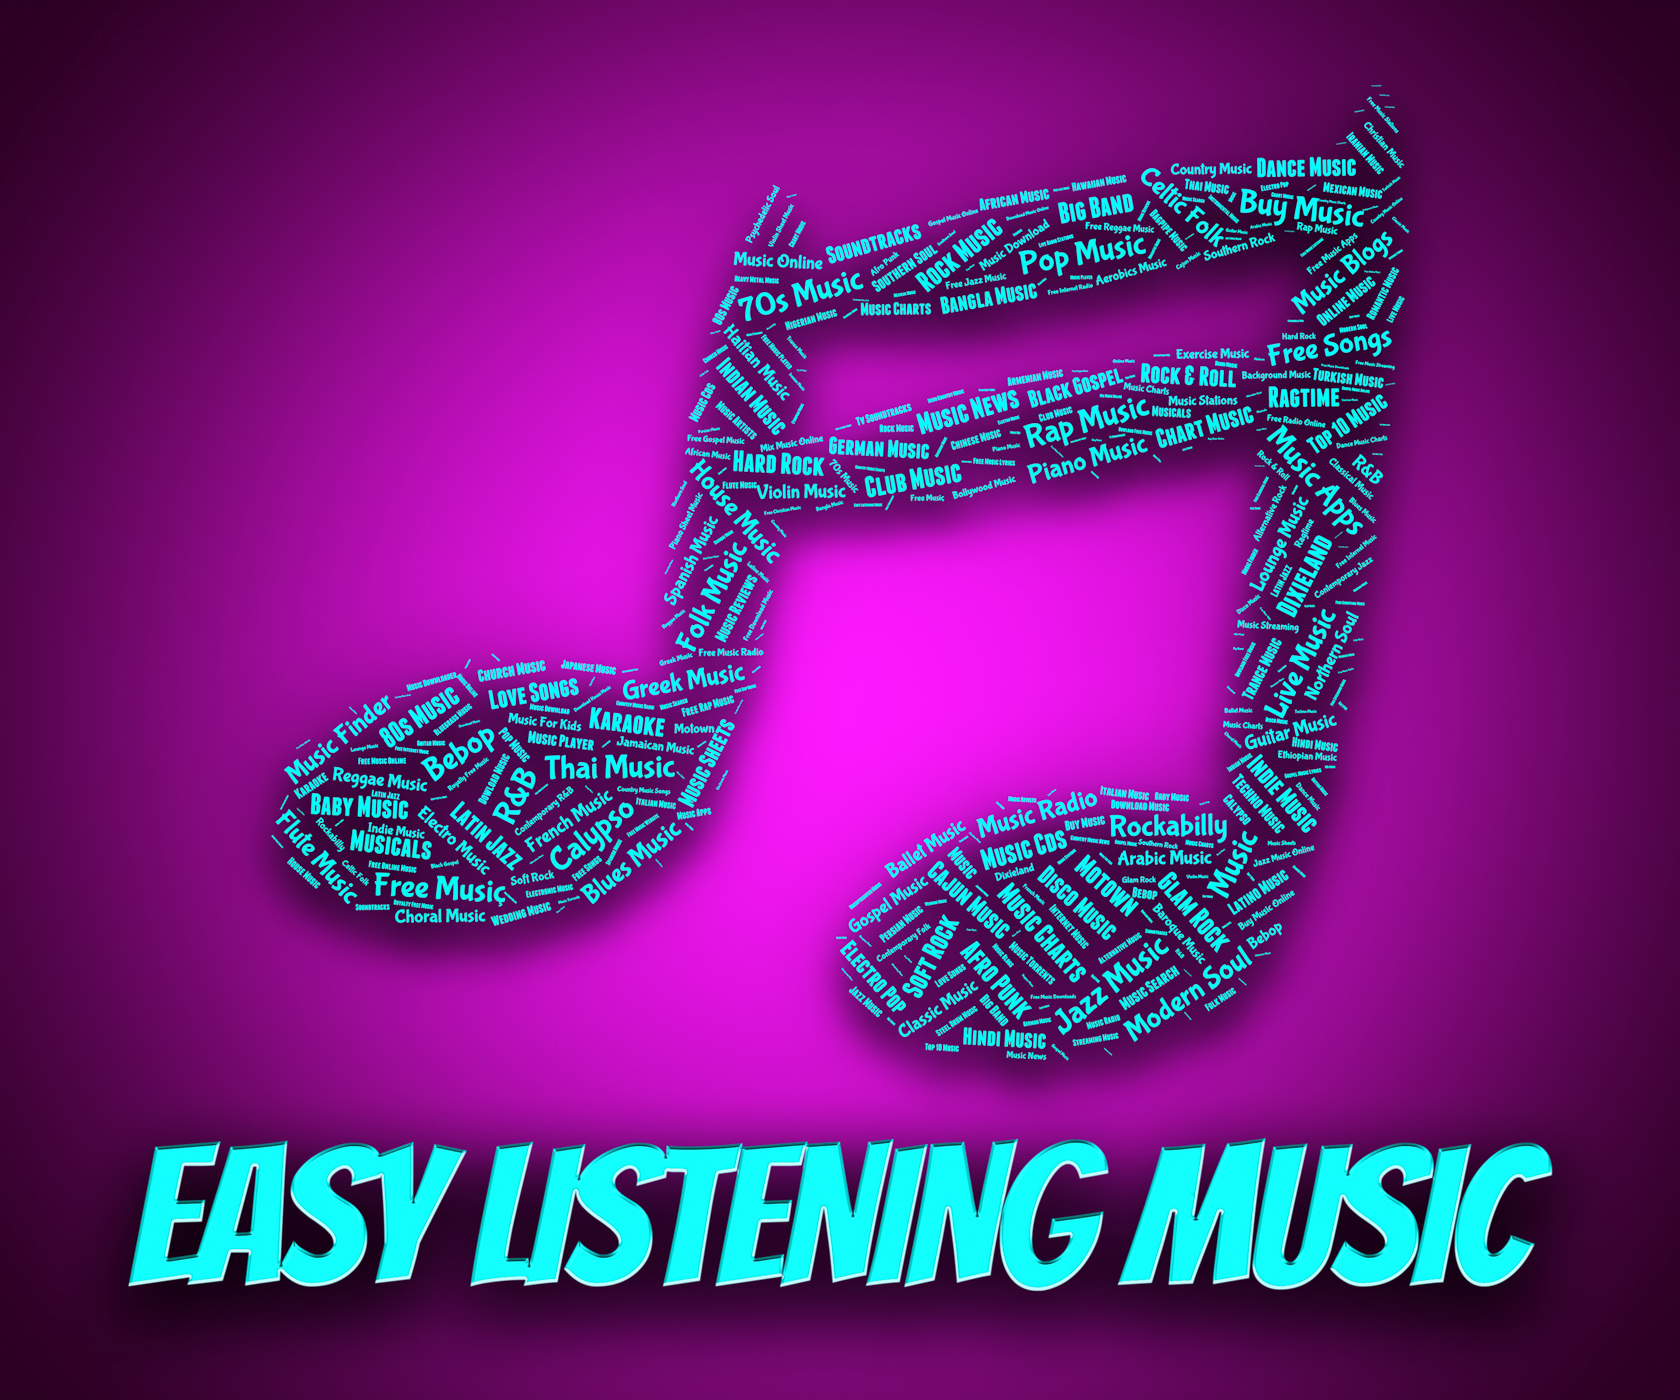 Easy listening music indicates orchestral pop and ensemble photo